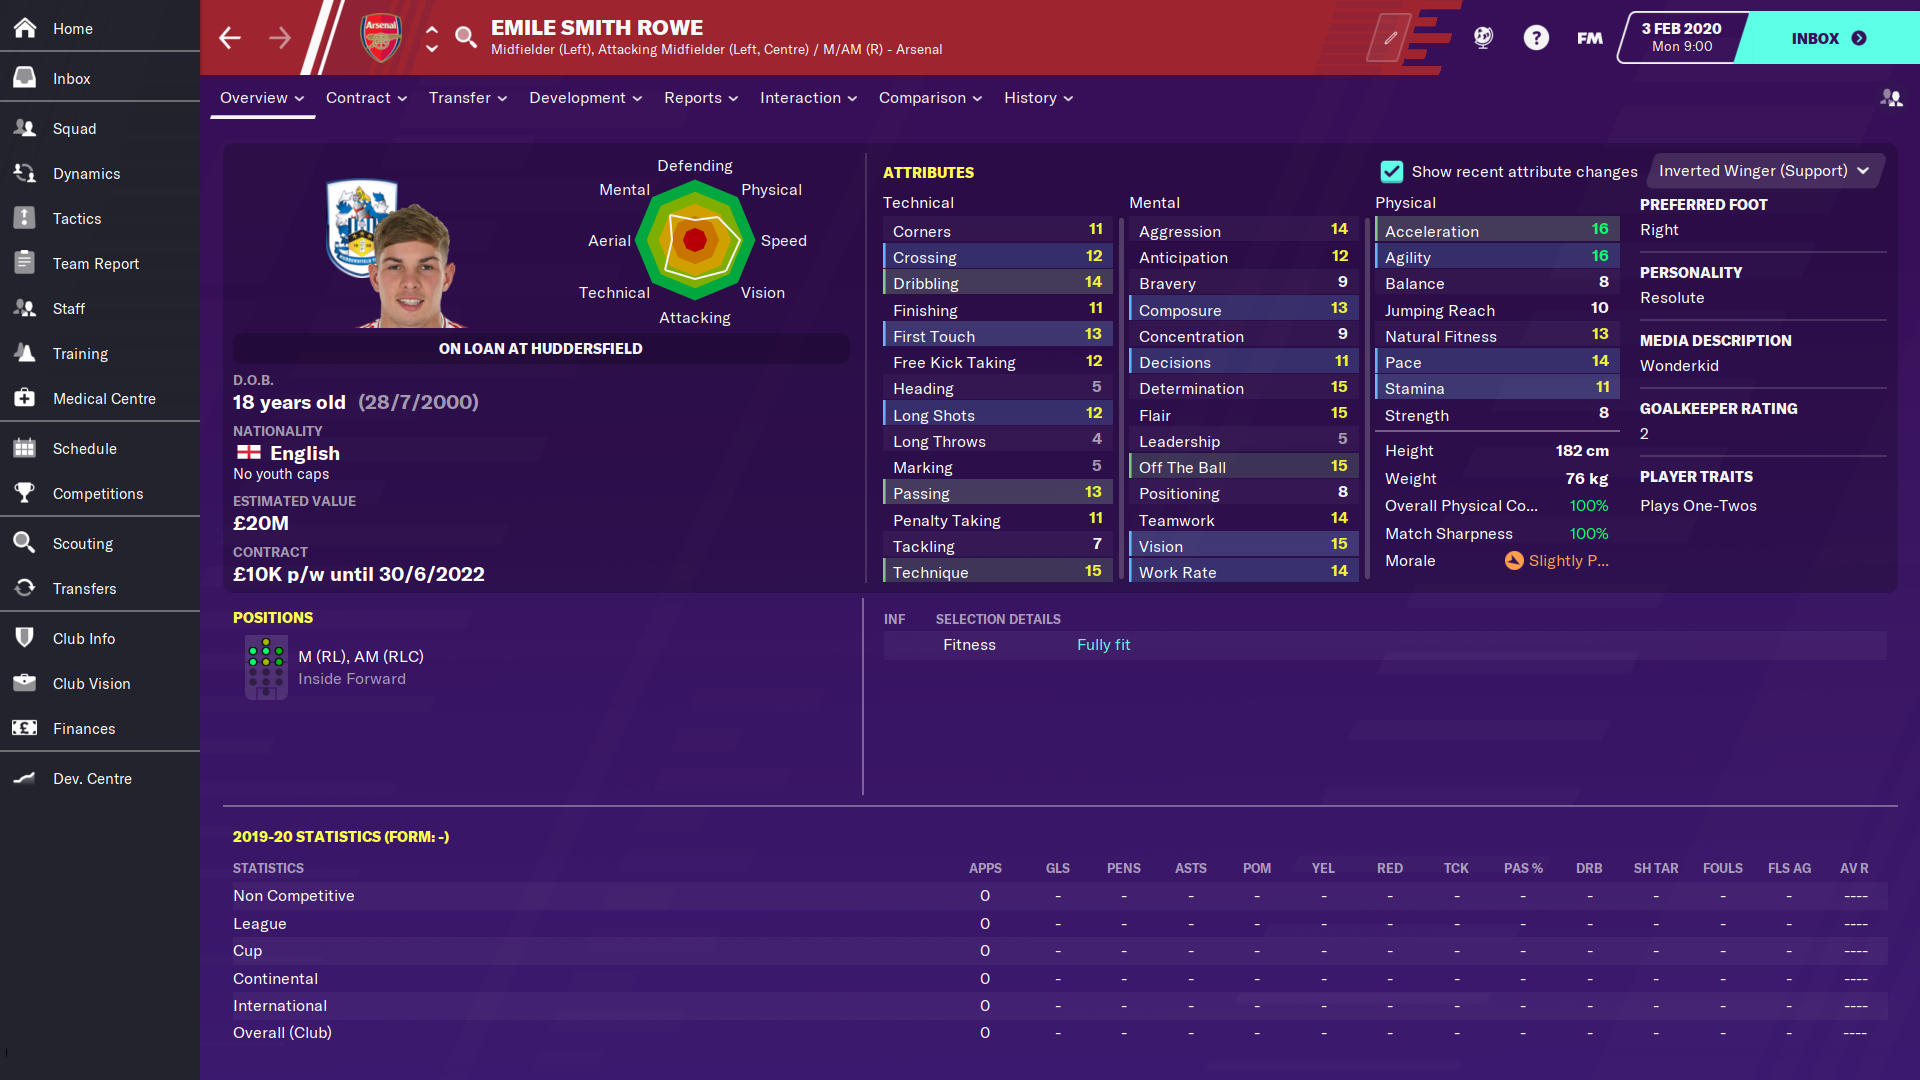 Emile Smith-Rowe's profile in Football Manager 2020